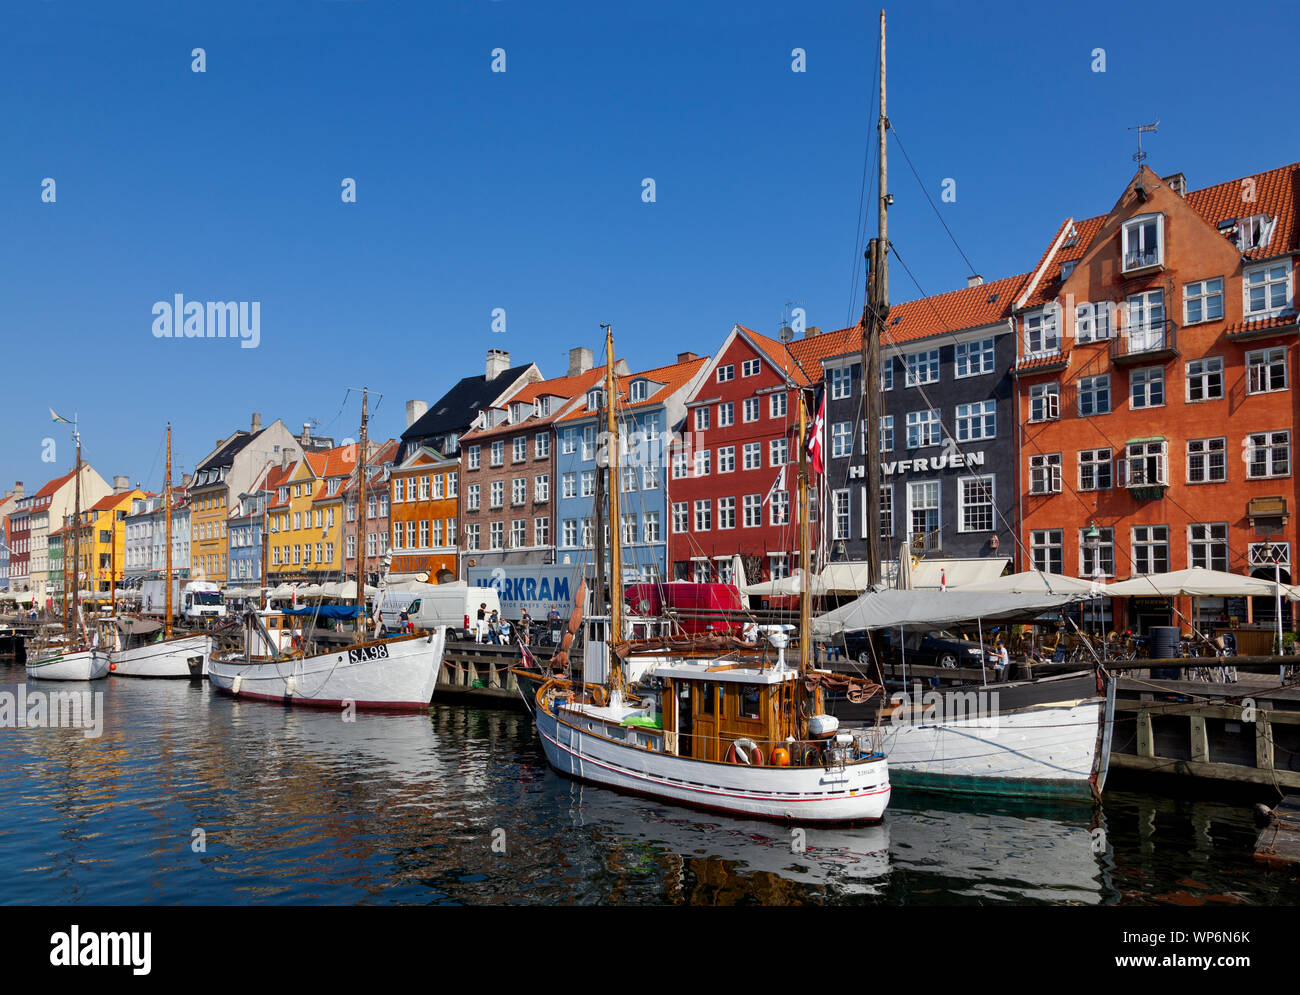 Beautiful old vessels and sailing ships in popular Nyhavn canal. Brightly coloured houses. Restaurants and bars crowded with tourists and visitors. Stock Photo